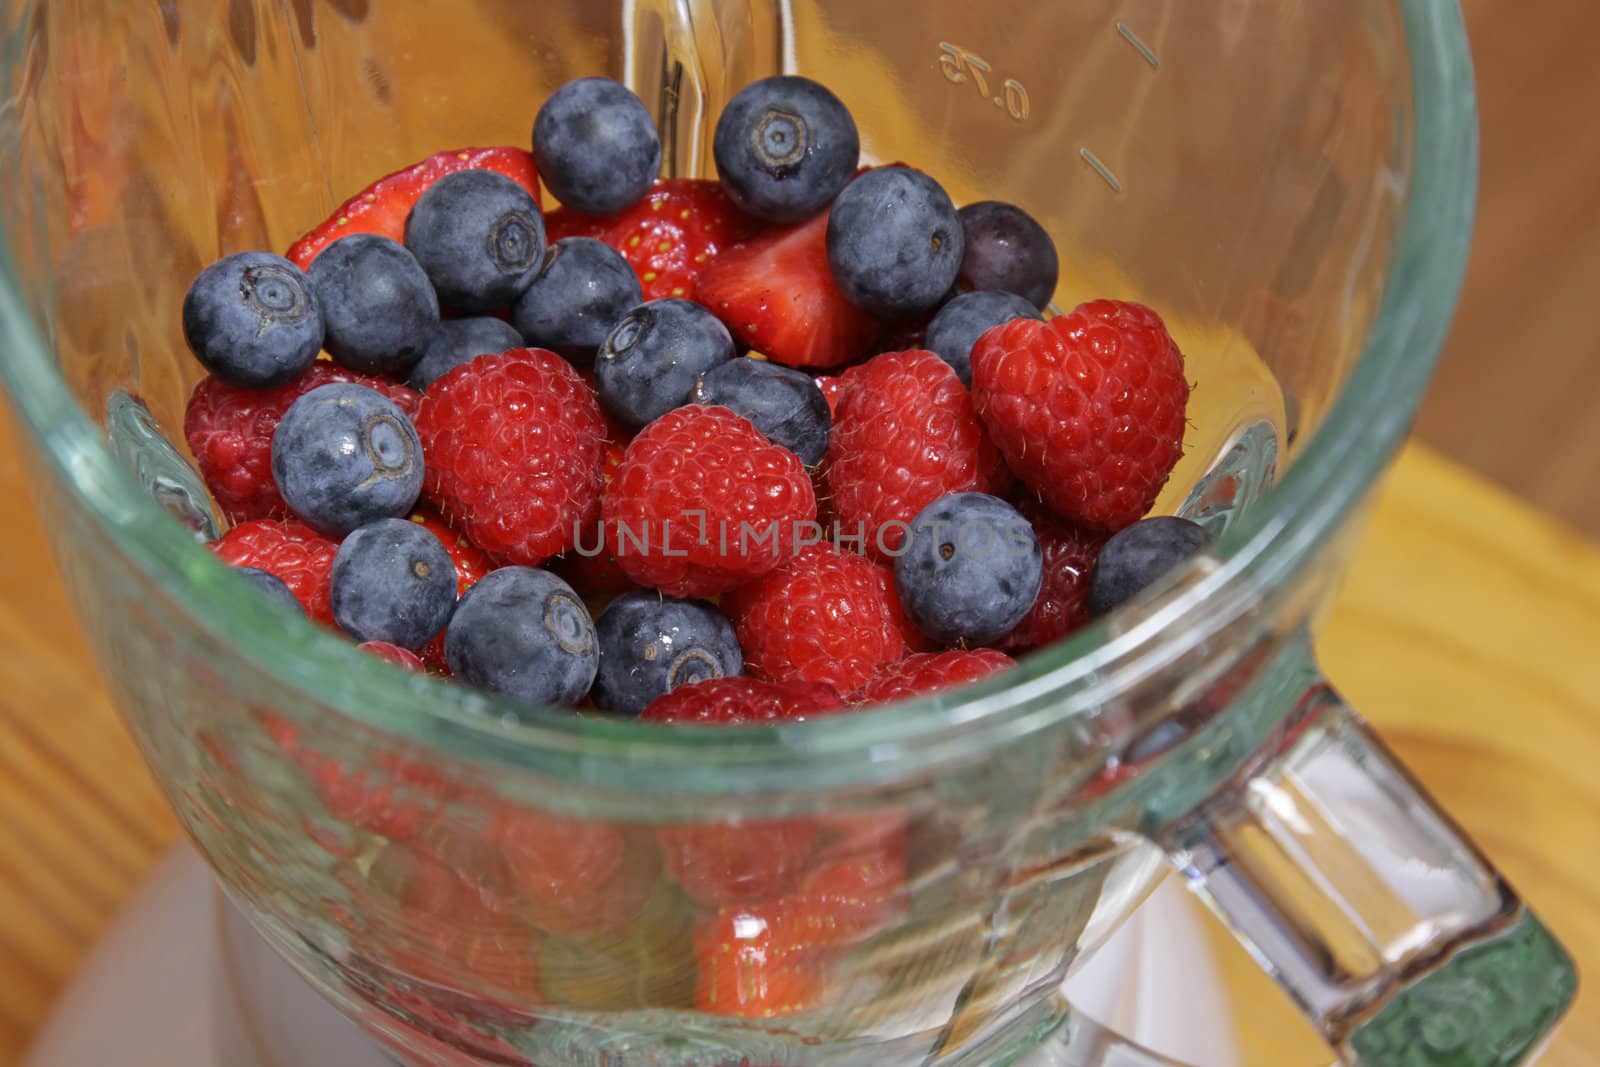 Berries in a Blender by ca2hill